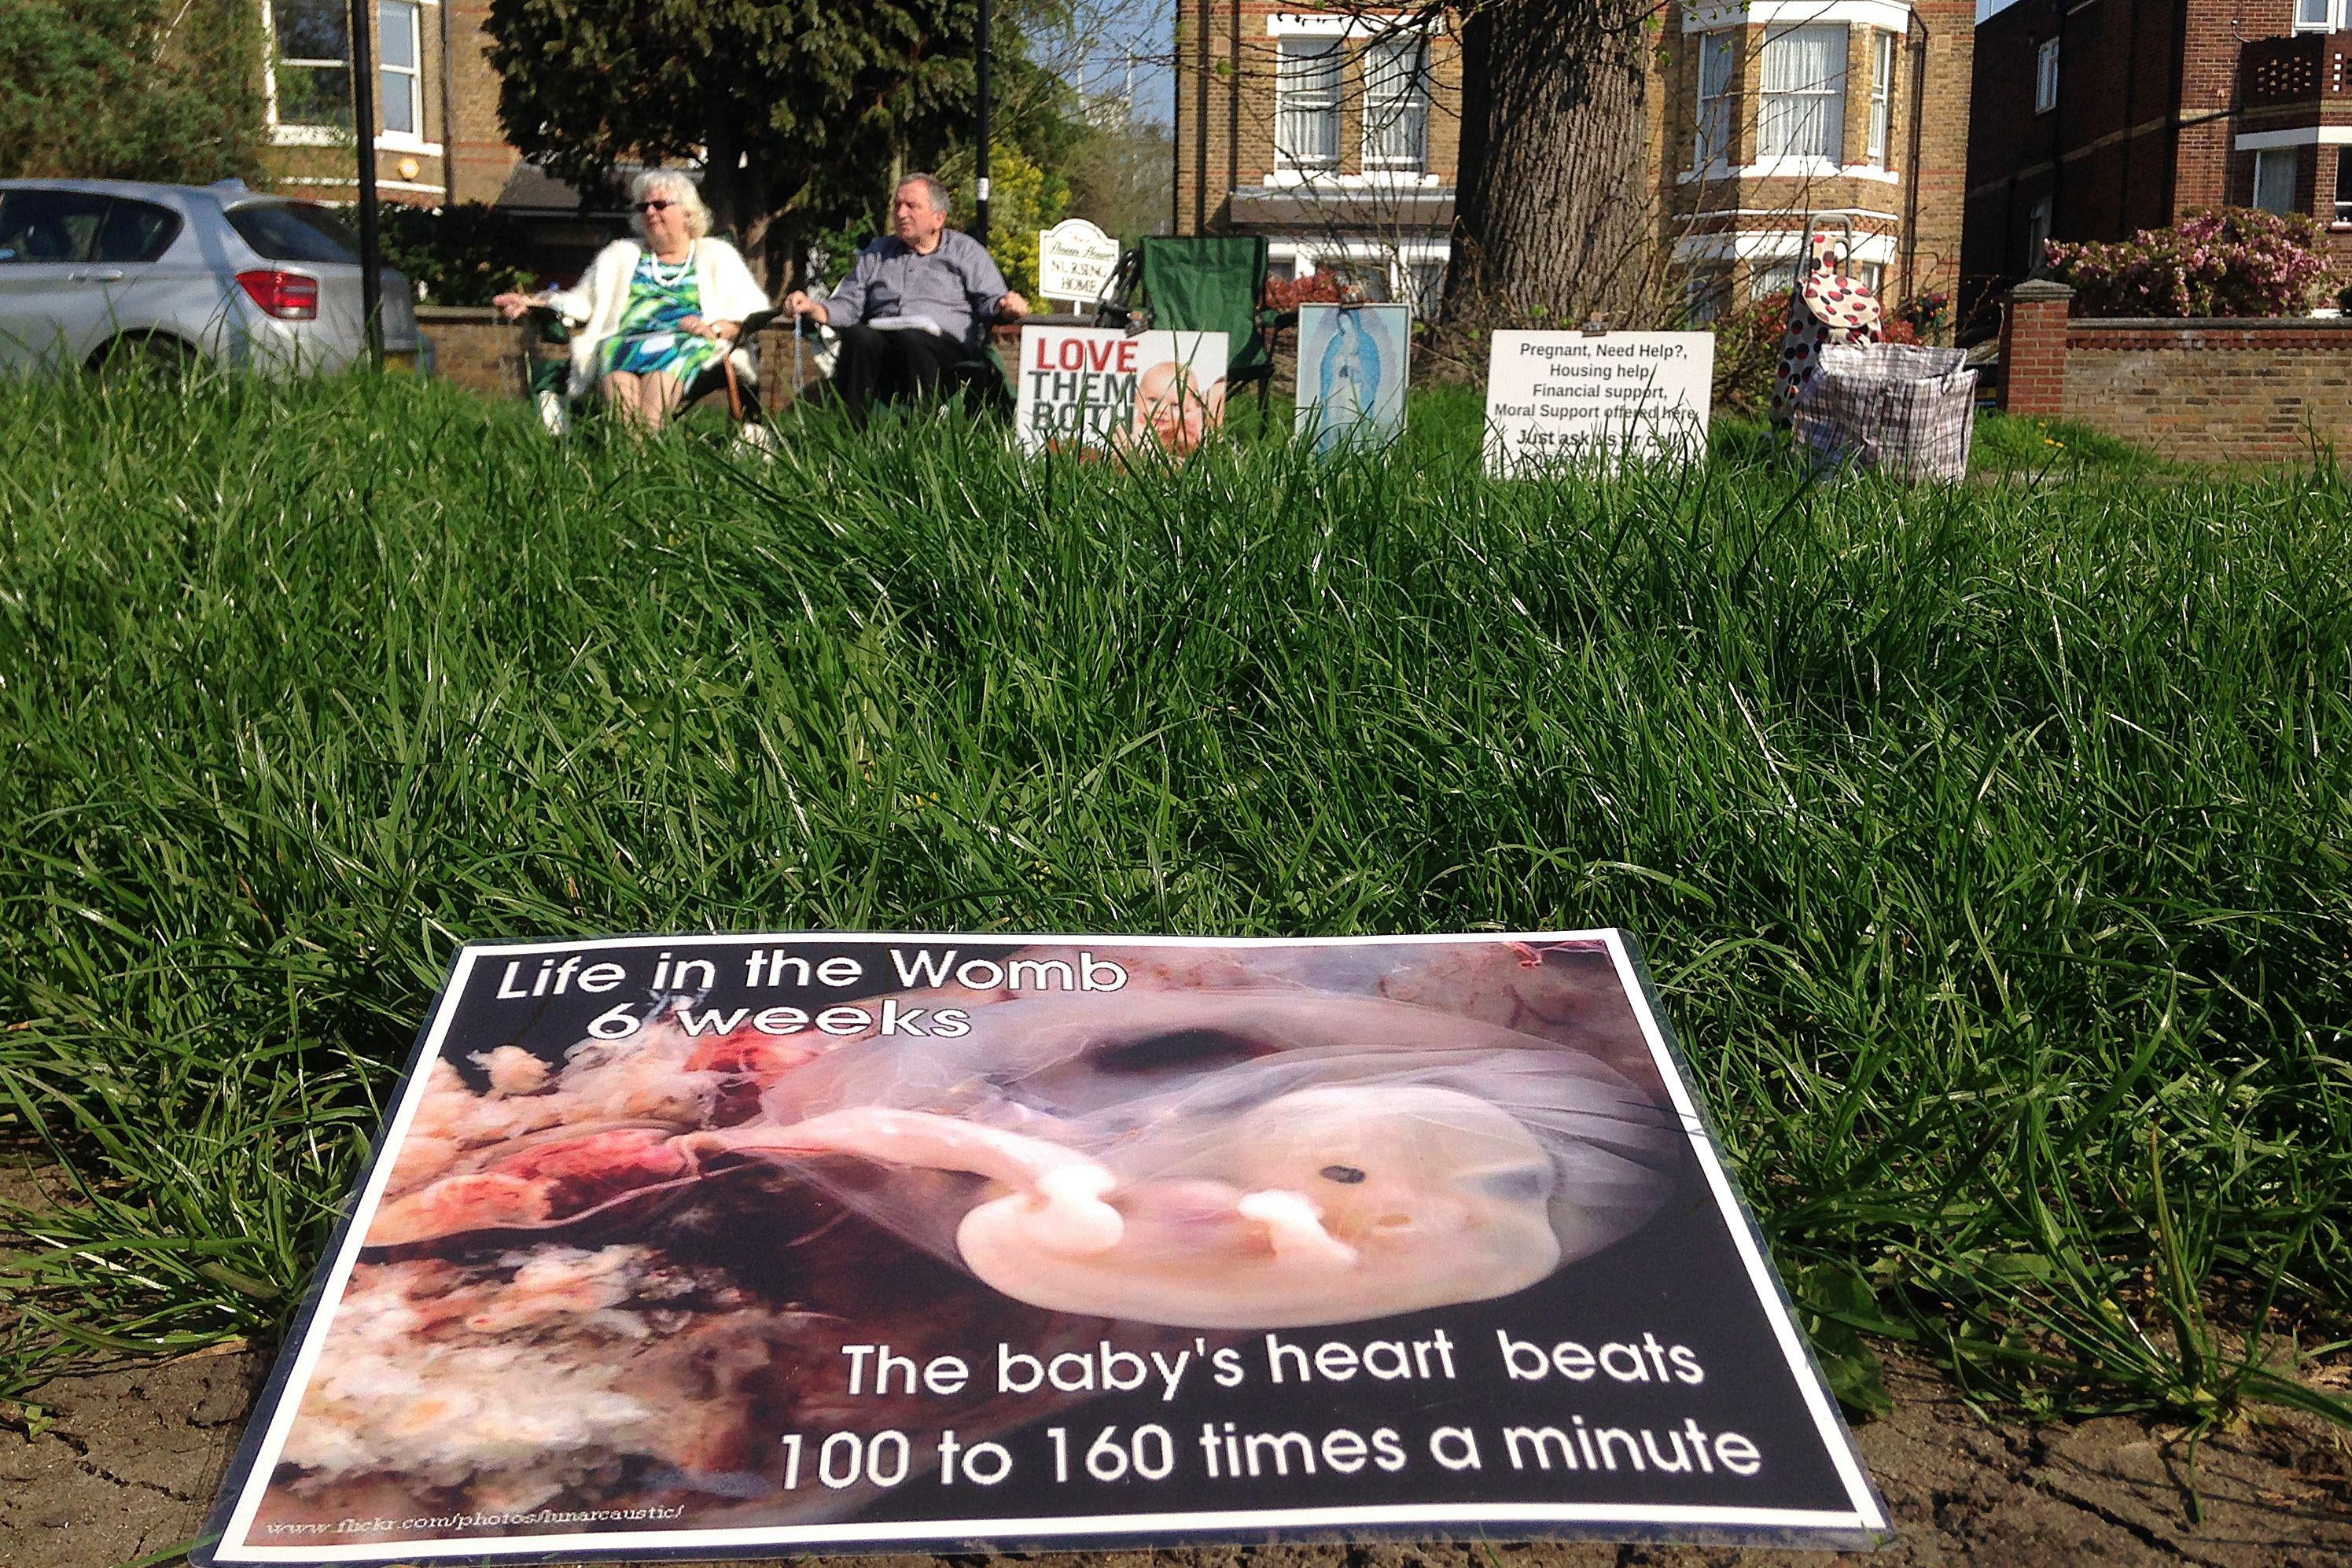 Colleen Wallace (L) and Eamonn Gill, who oppose abortion attend a pro-life vigil on the street outside the Marie Stopes clinic, that offers contraception and abortion services, in Ealing, west London, on April 21, 2018. - A ban on pro-life protests outside an abortion clinic in London came into force on Monday in a first that pro-choice campaigners hope will set a precedent for the country. (Photo by ALICE RITCHIE / AFP)        (Photo credit should read ALICE RITCHIE/AFP/Getty Images)